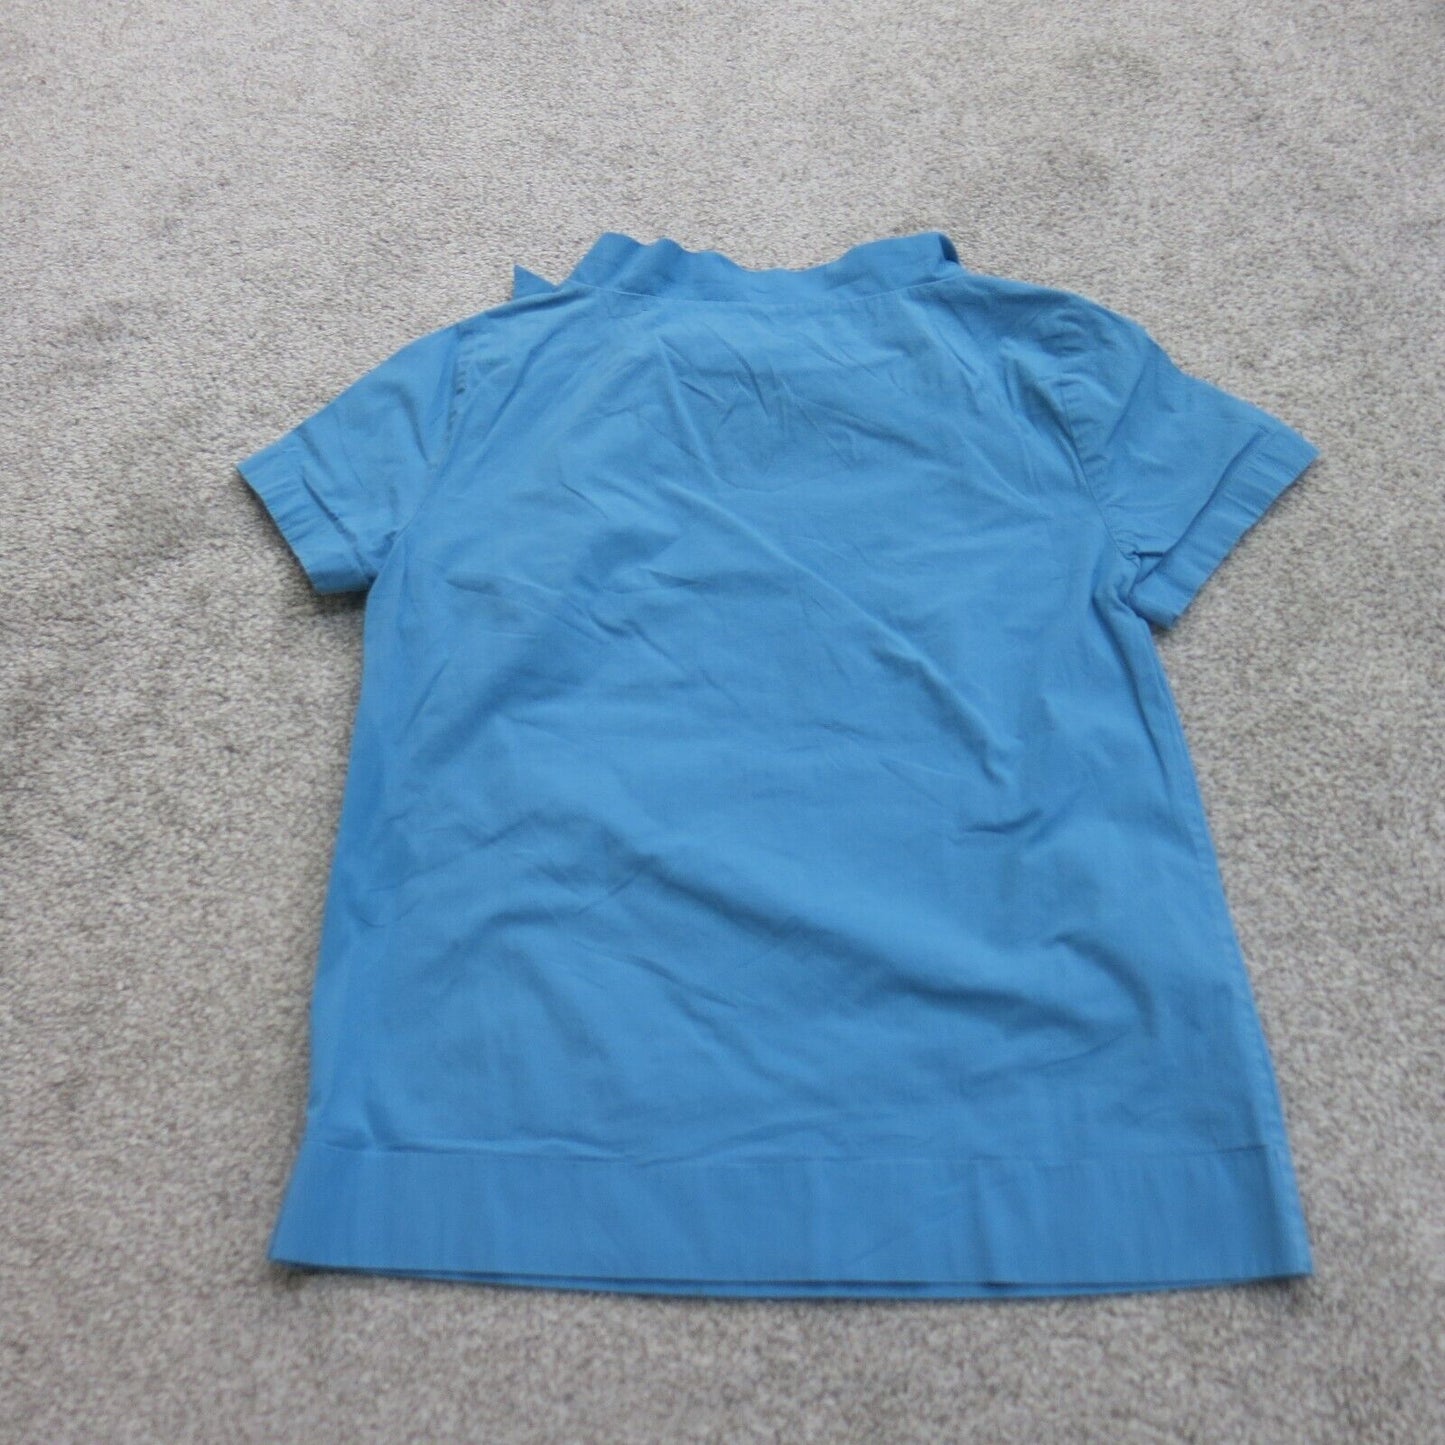 Talbots Women Casual Blouse Top Shirt Short Sleeves Tie Neck Blue Size 4